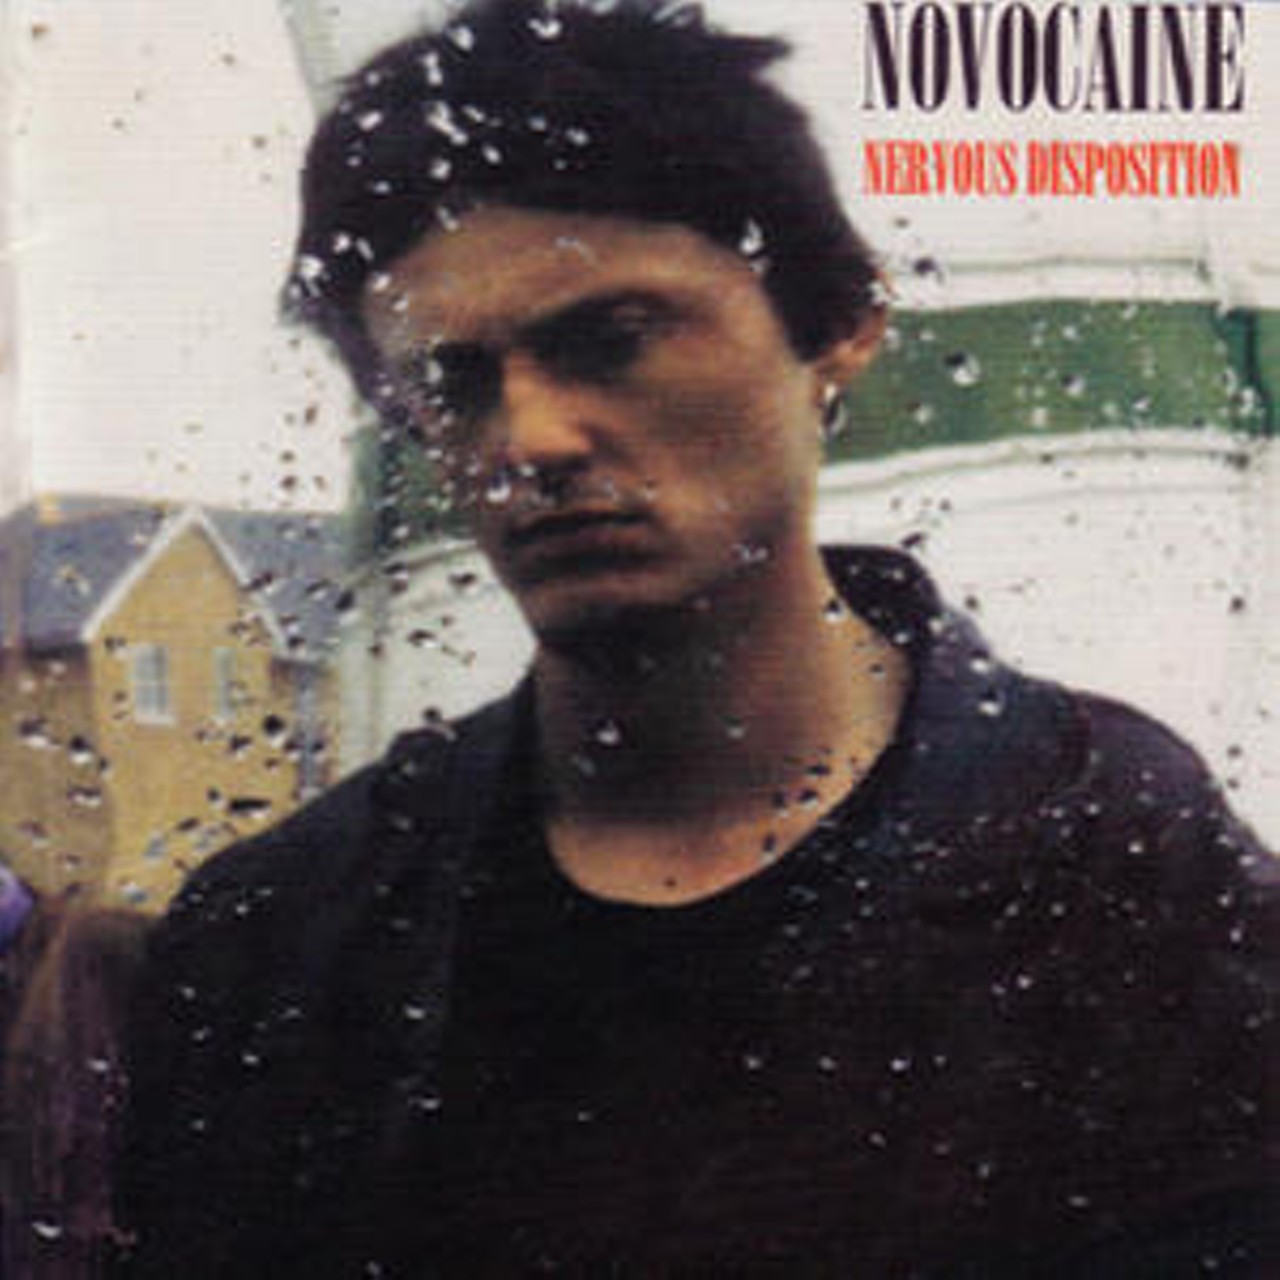 A real "blink and you miss 'em" band, this one. Novocaine was volatile and dangerous, but also capable of creating some beautiful, touching and desperate music. Listen to "Frustration No. 10" and you'll get it.